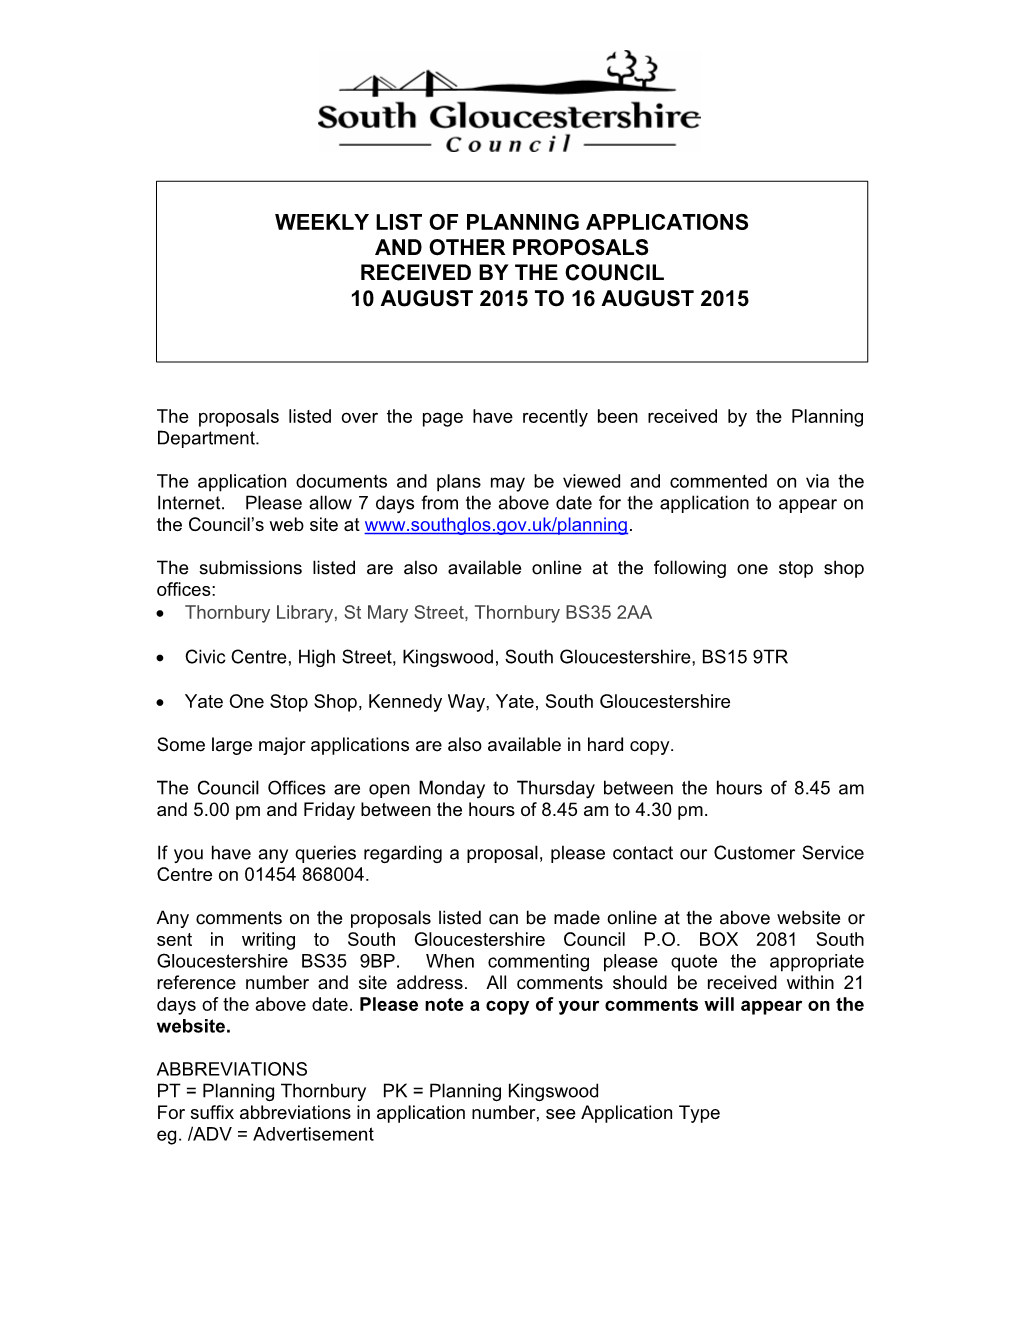 Weekly List of Planning Applications and Other Proposals Received by the Council 10 August 2015 to 16 August 2015